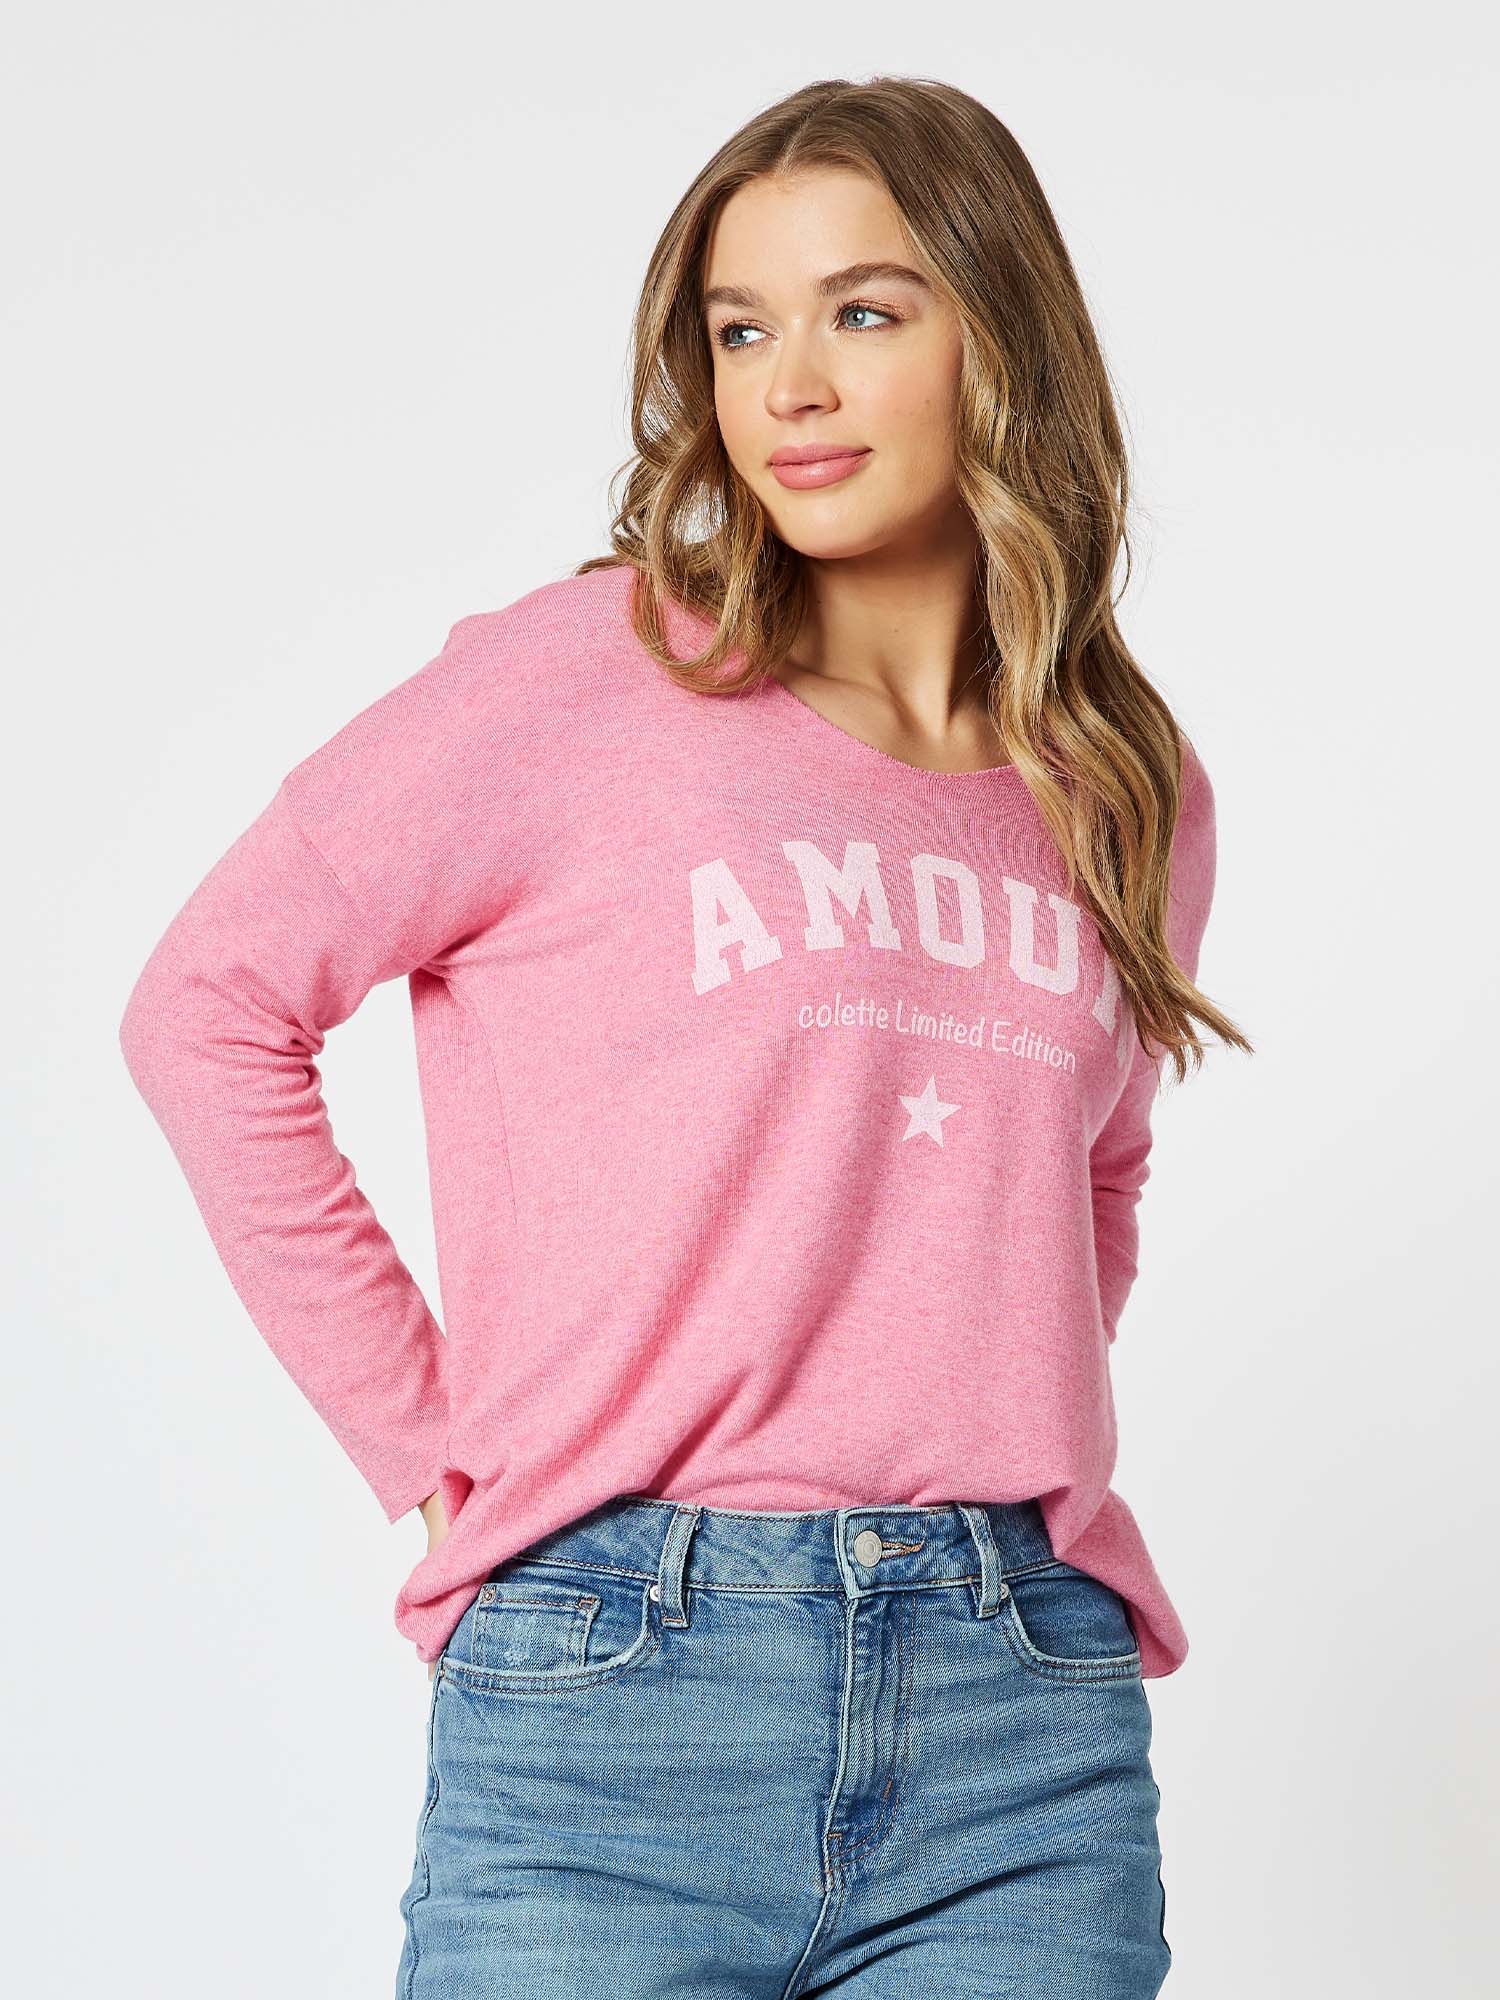 Amour Knit Top Top - Pink